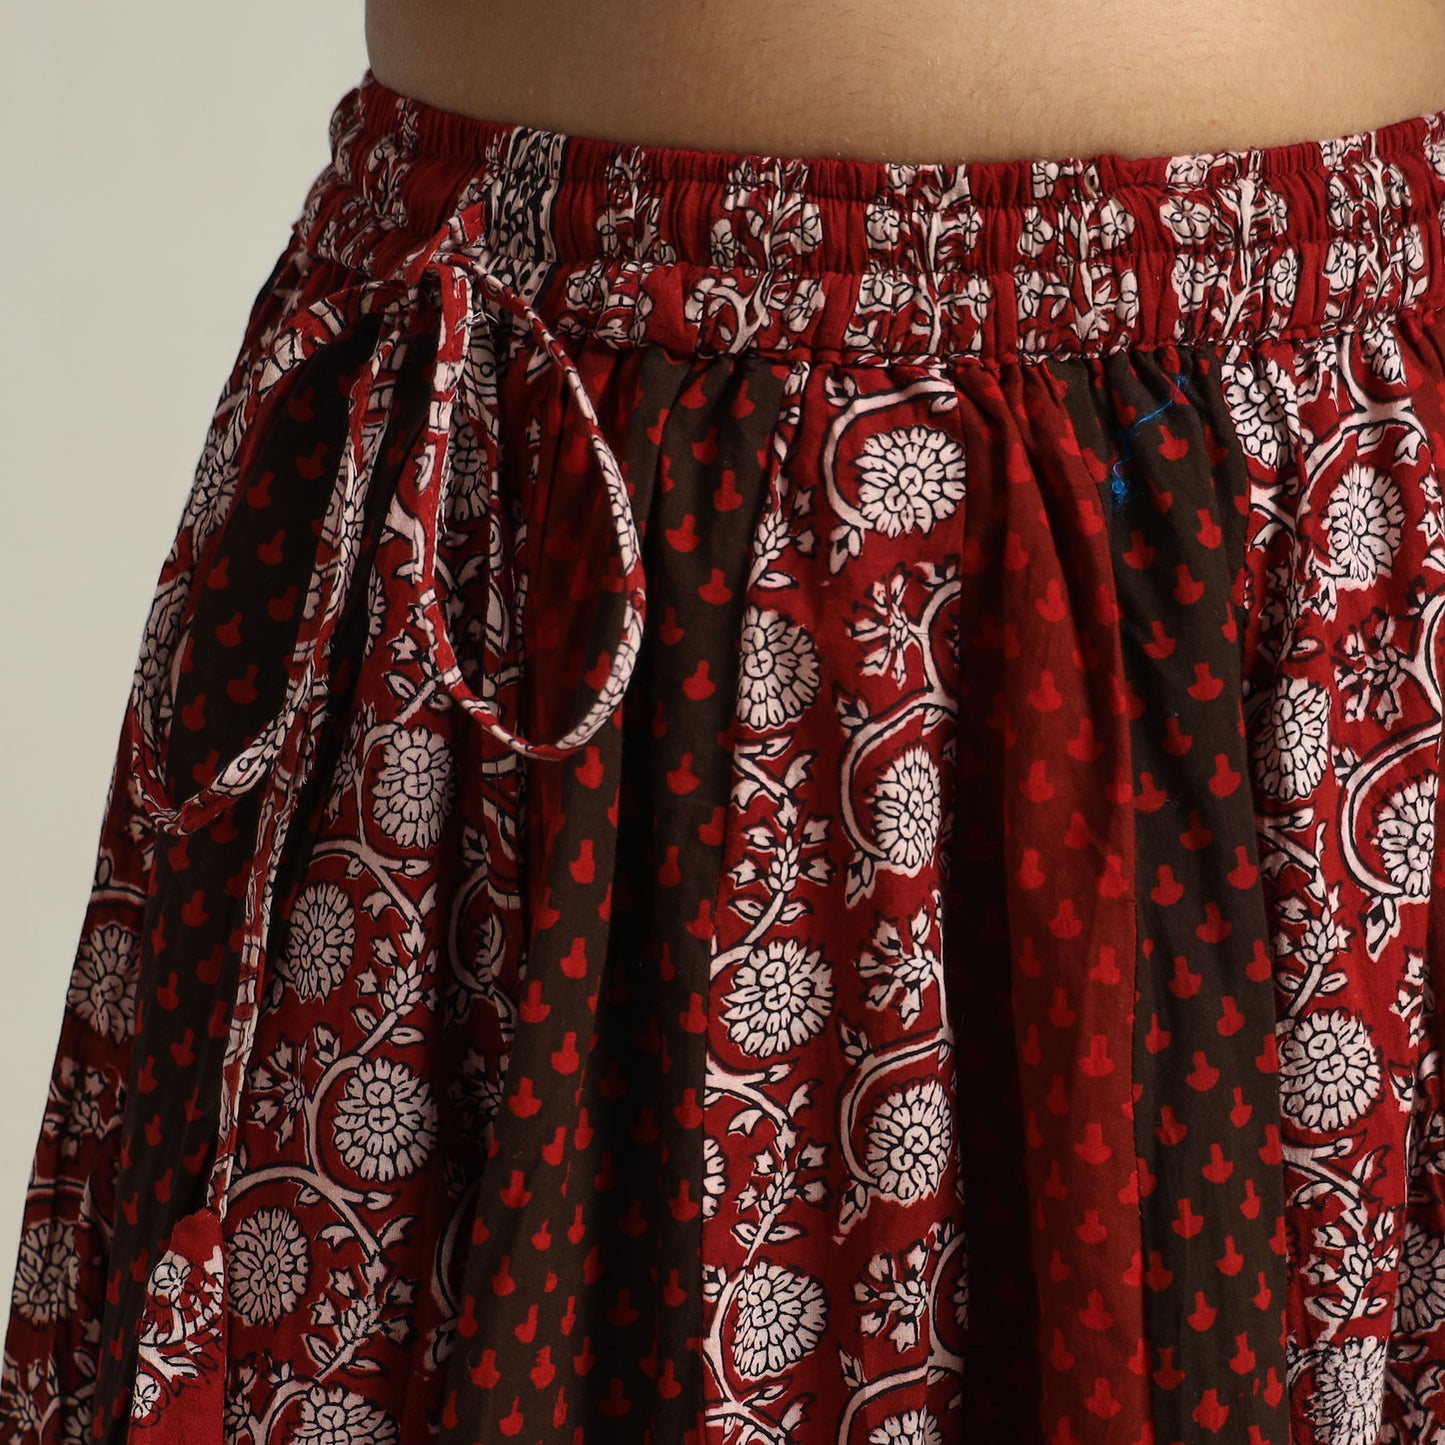 Maroon - Bagh Block Printed Patchwork Cotton Long Skirt